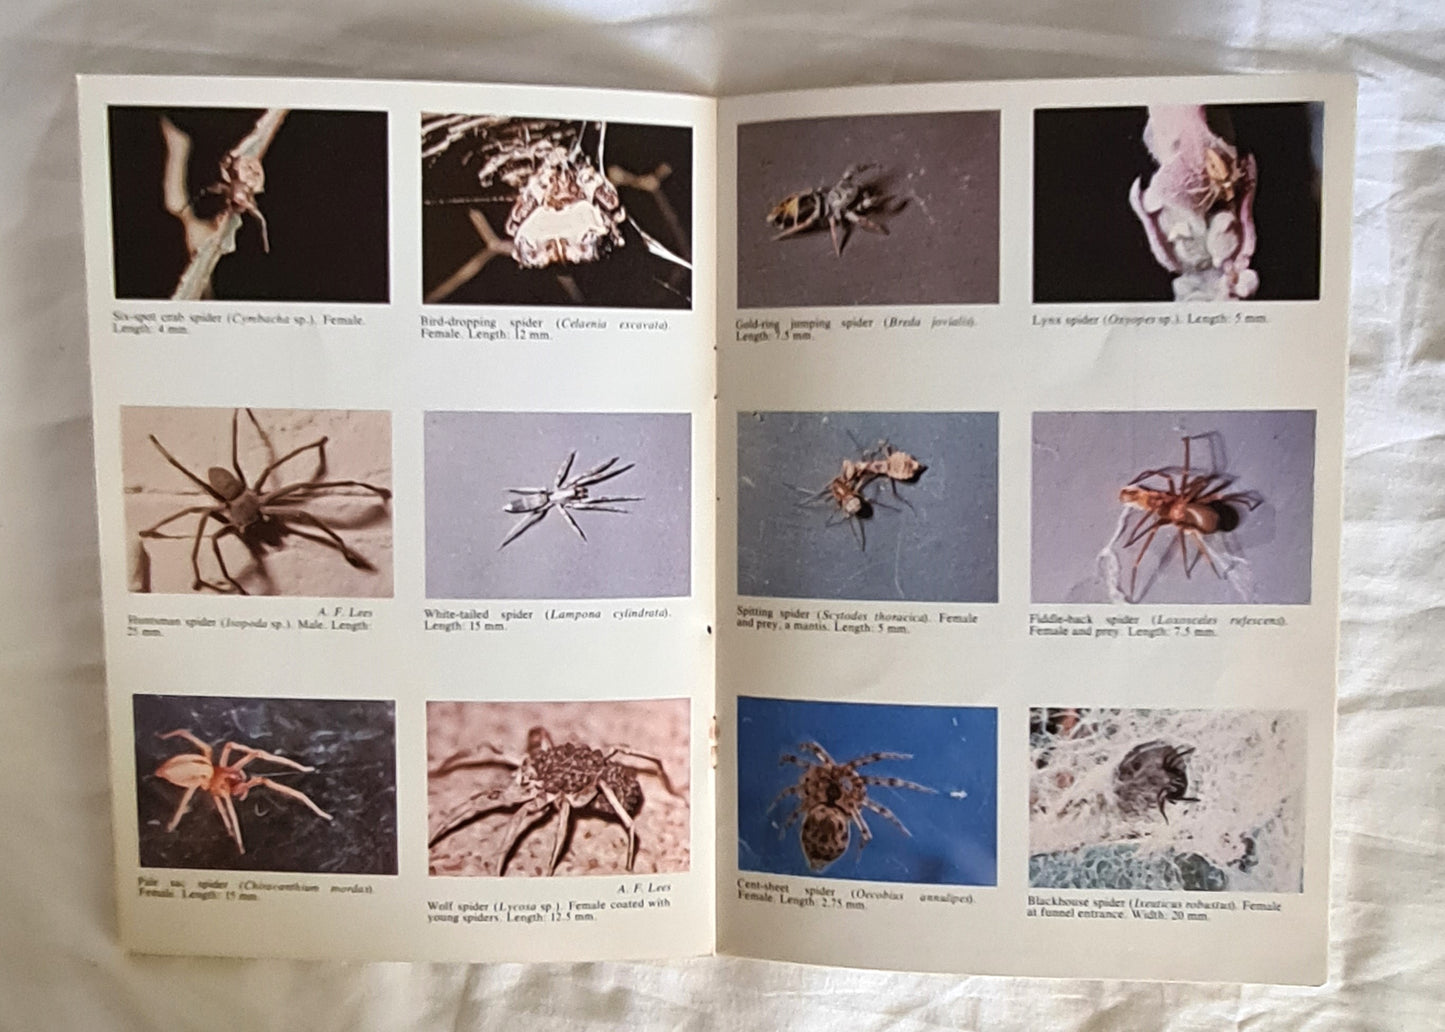 Spiders and Other Arachnids of South Australia by D. C. Lee and R. V. Southcott